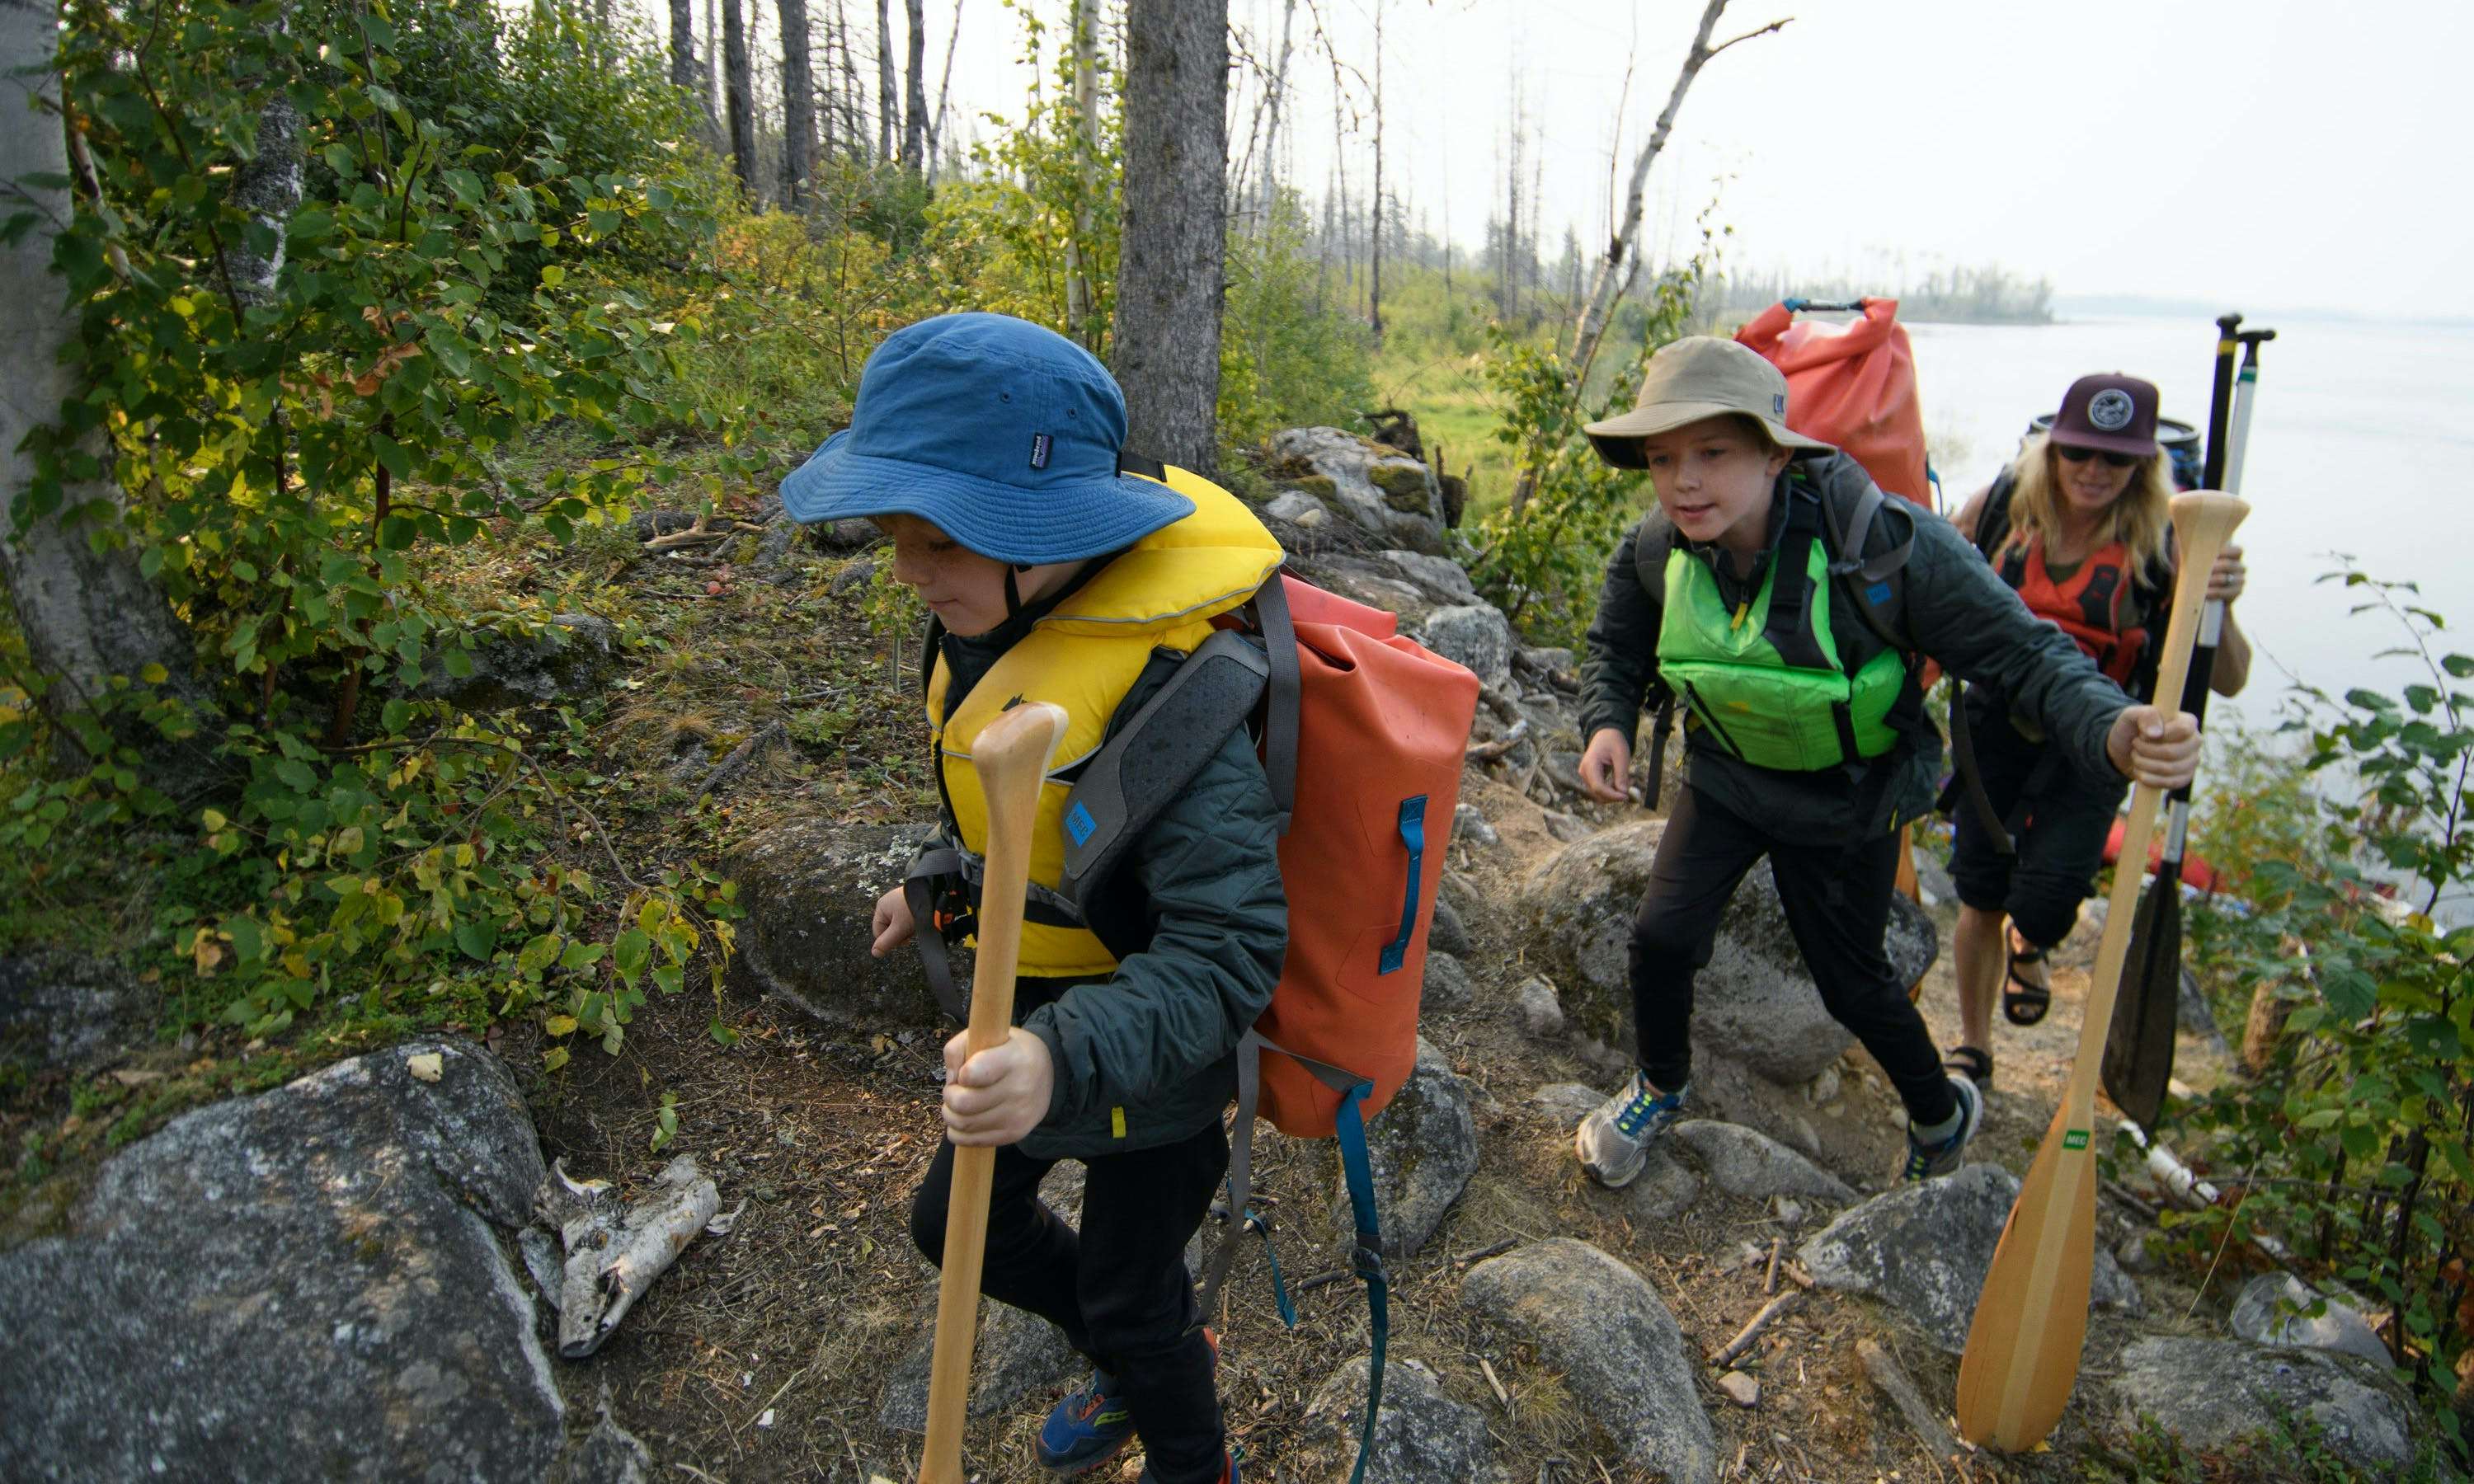 Two boys and their mother hike up a rocky trail carrying their canoe paddles and camping gear.